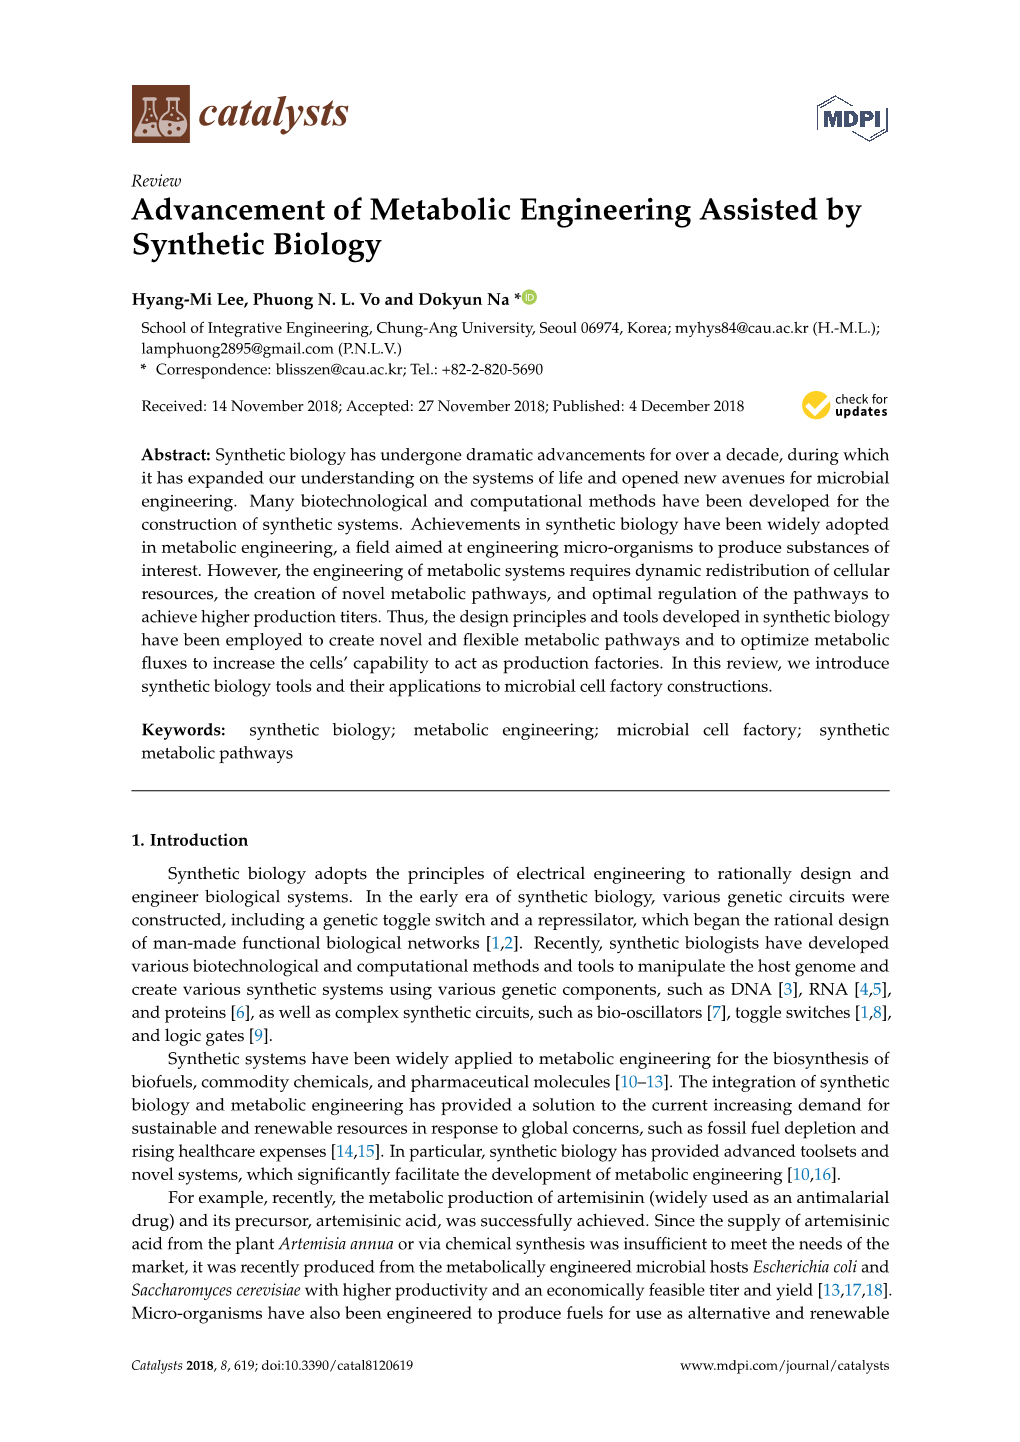 Advancement of Metabolic Engineering Assisted by Synthetic Biology